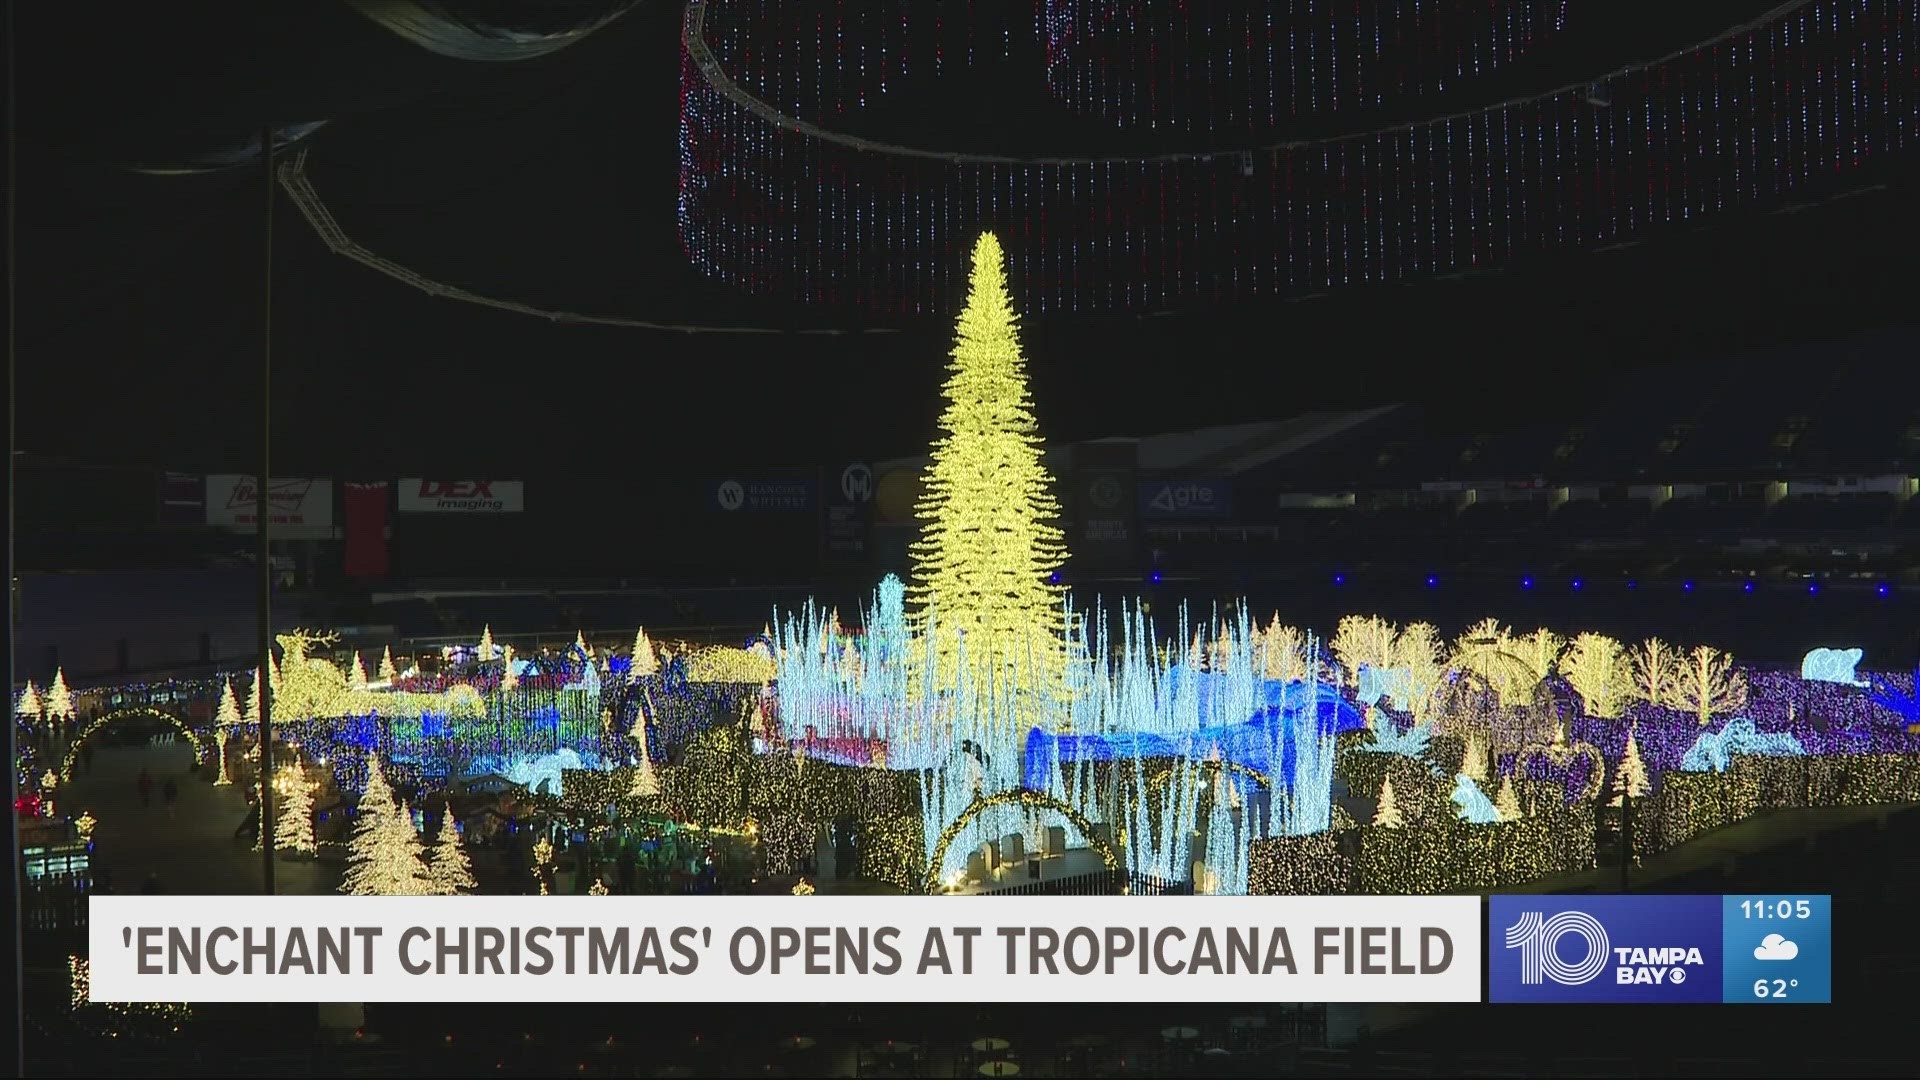 It may not snow in the Tampa Bay region, but Enchant Christmas will surely put you in the Christmas spirit.